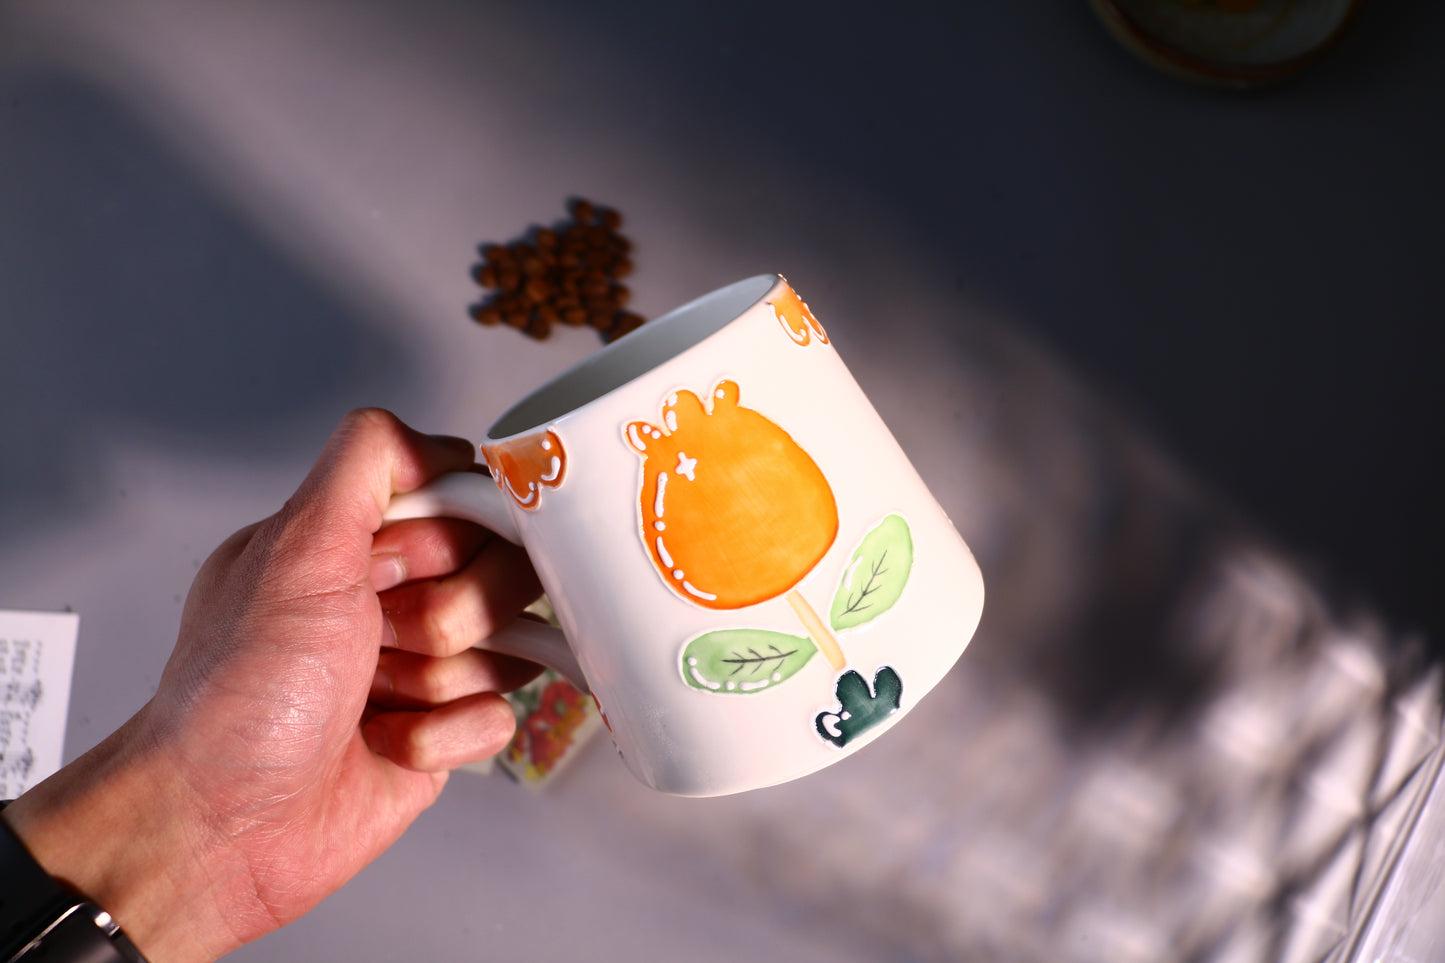 Orange Floral Ceramic Coffee Mug, Personalized Handmade Pottery Cup for Gifts